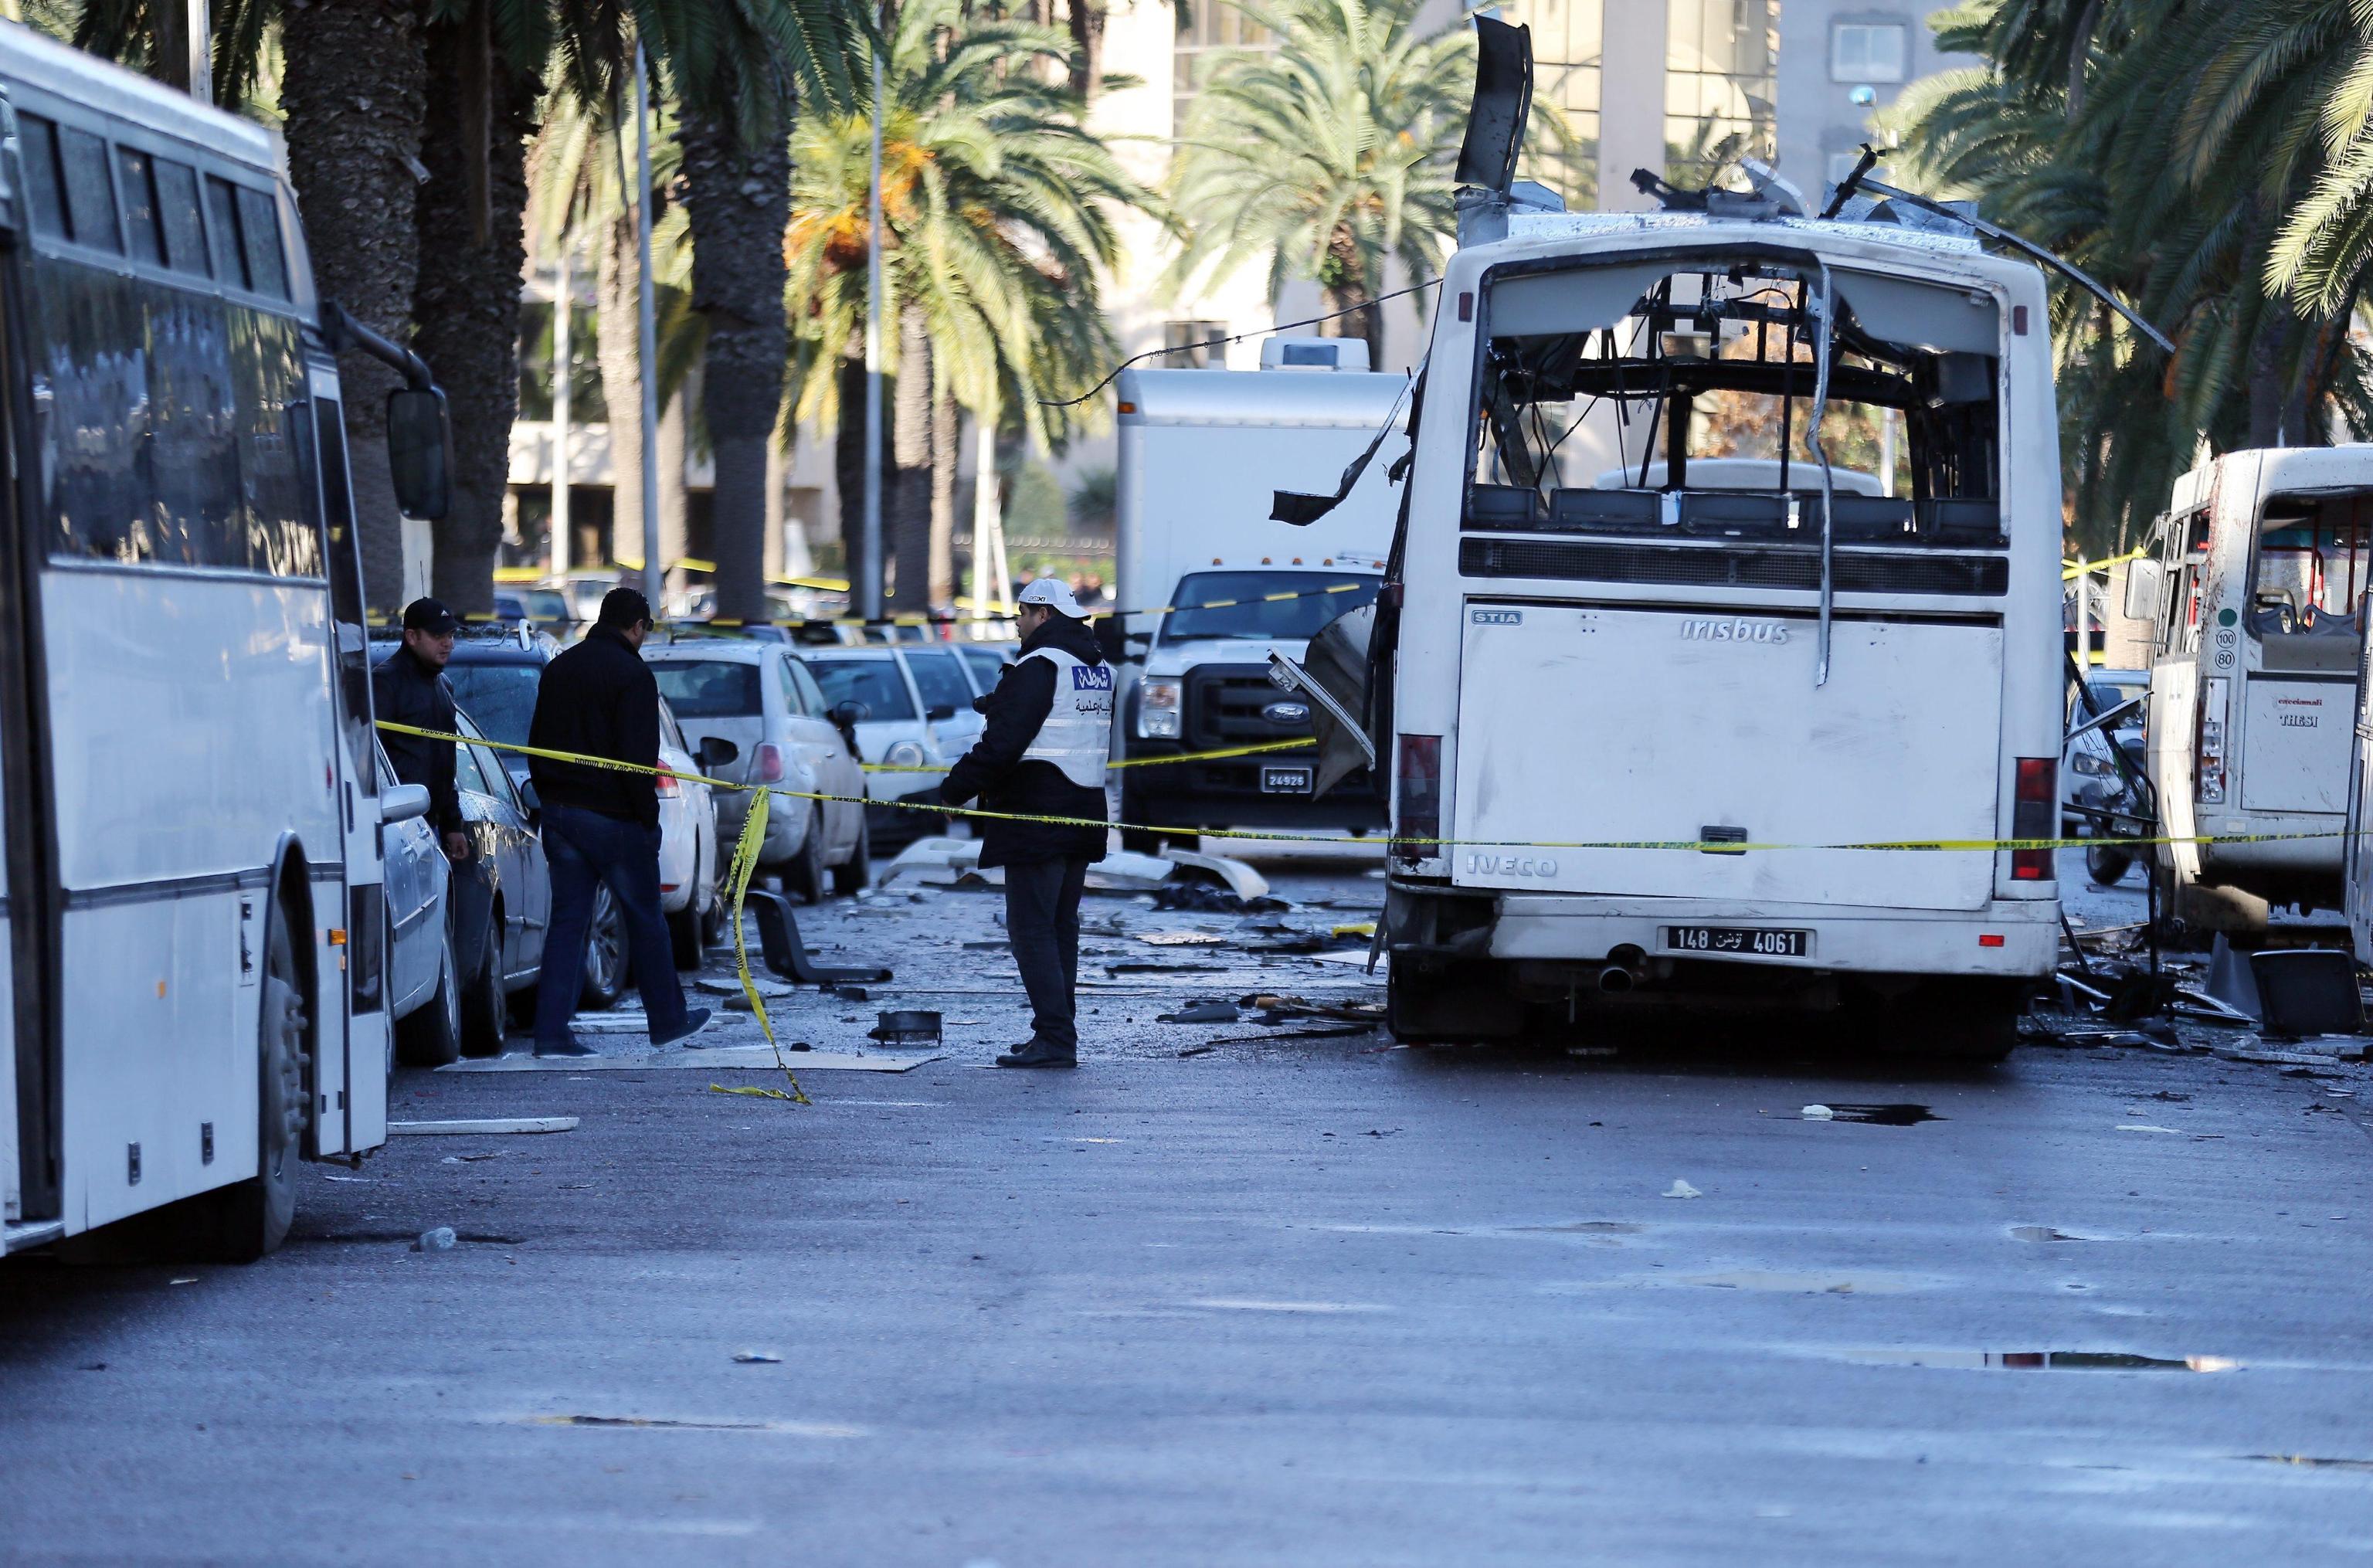 Tunisian forensic police inspect the wreckage of a bus in the aftermath of a bomb attack on a bus transporting Tunisia's presidential guard in Tunis